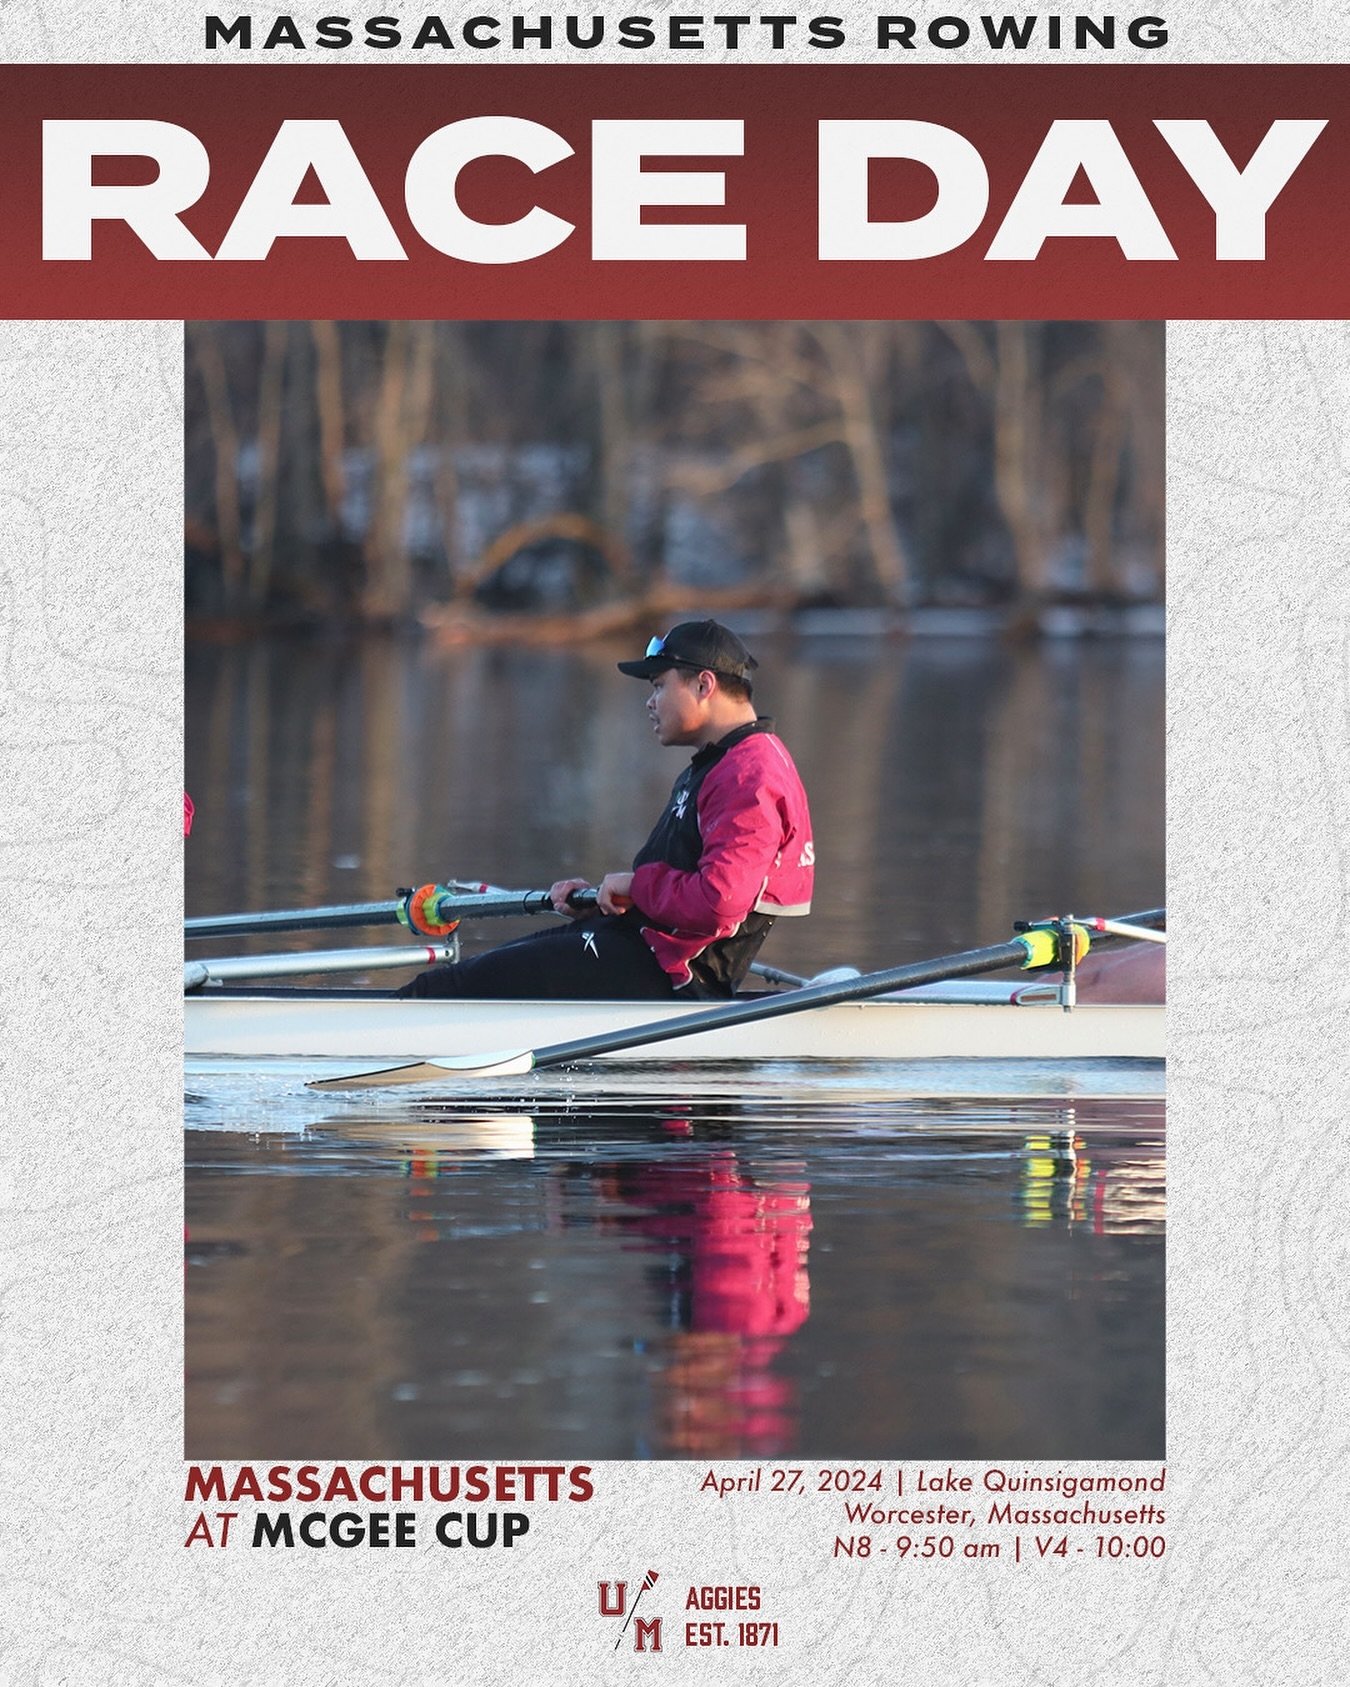 The Aggies take it back to Worcester tomorrow for their last regular-season regatta at the McGee Cup.

Come watch Mark&rsquo;s Godspeed catches live at Donahue rowing center! Go Aggies

#fjf